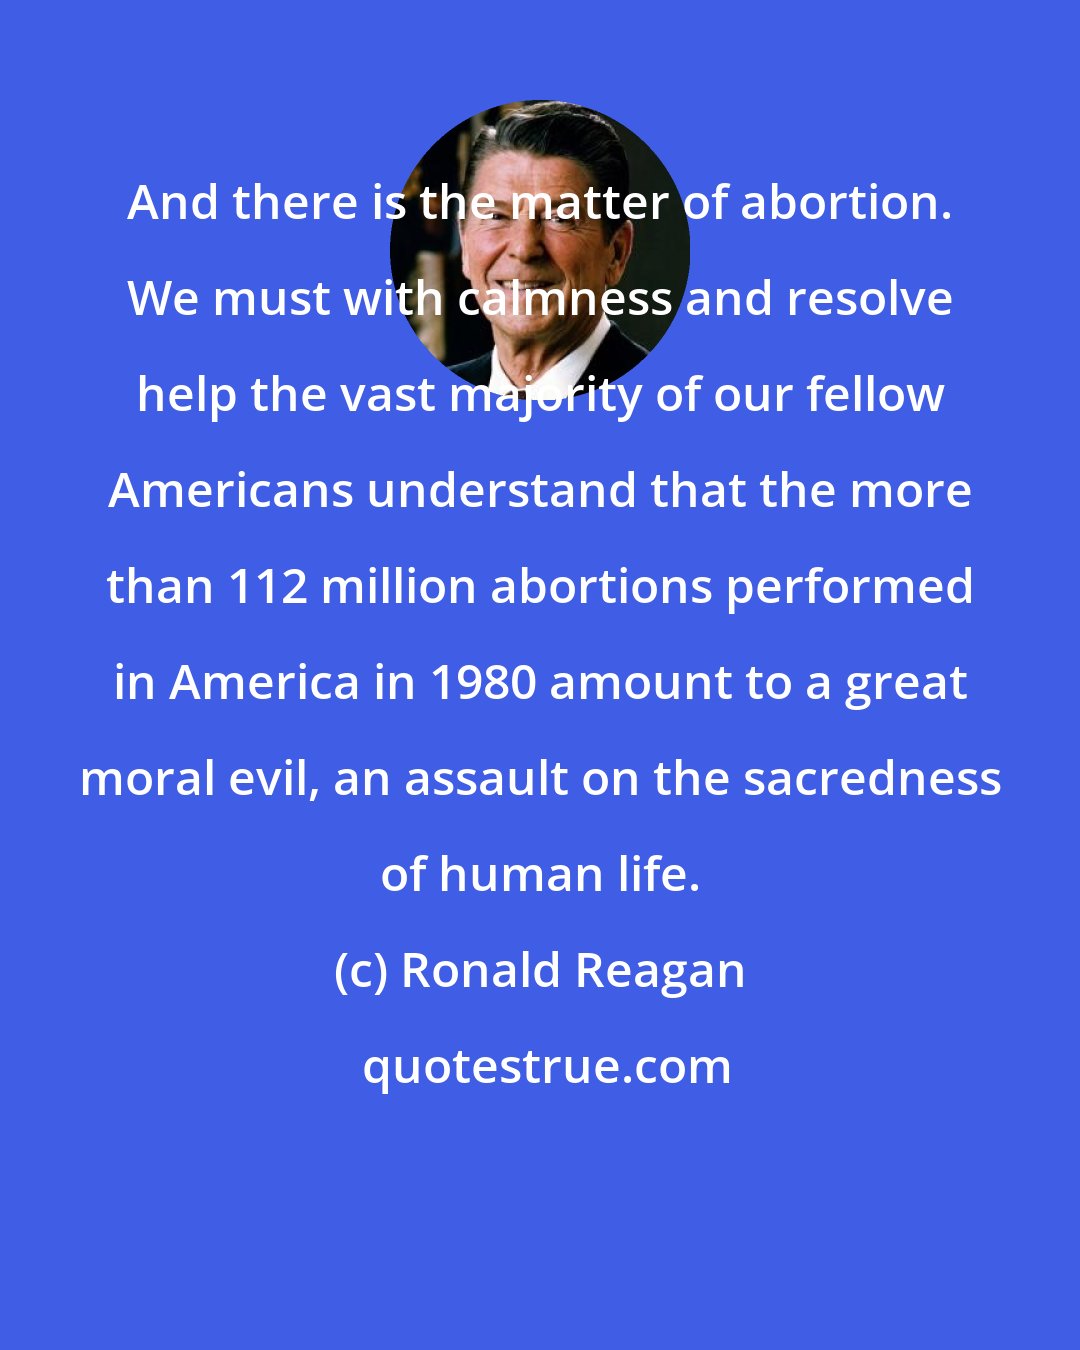 Ronald Reagan: And there is the matter of abortion. We must with calmness and resolve help the vast majority of our fellow Americans understand that the more than 112 million abortions performed in America in 1980 amount to a great moral evil, an assault on the sacredness of human life.